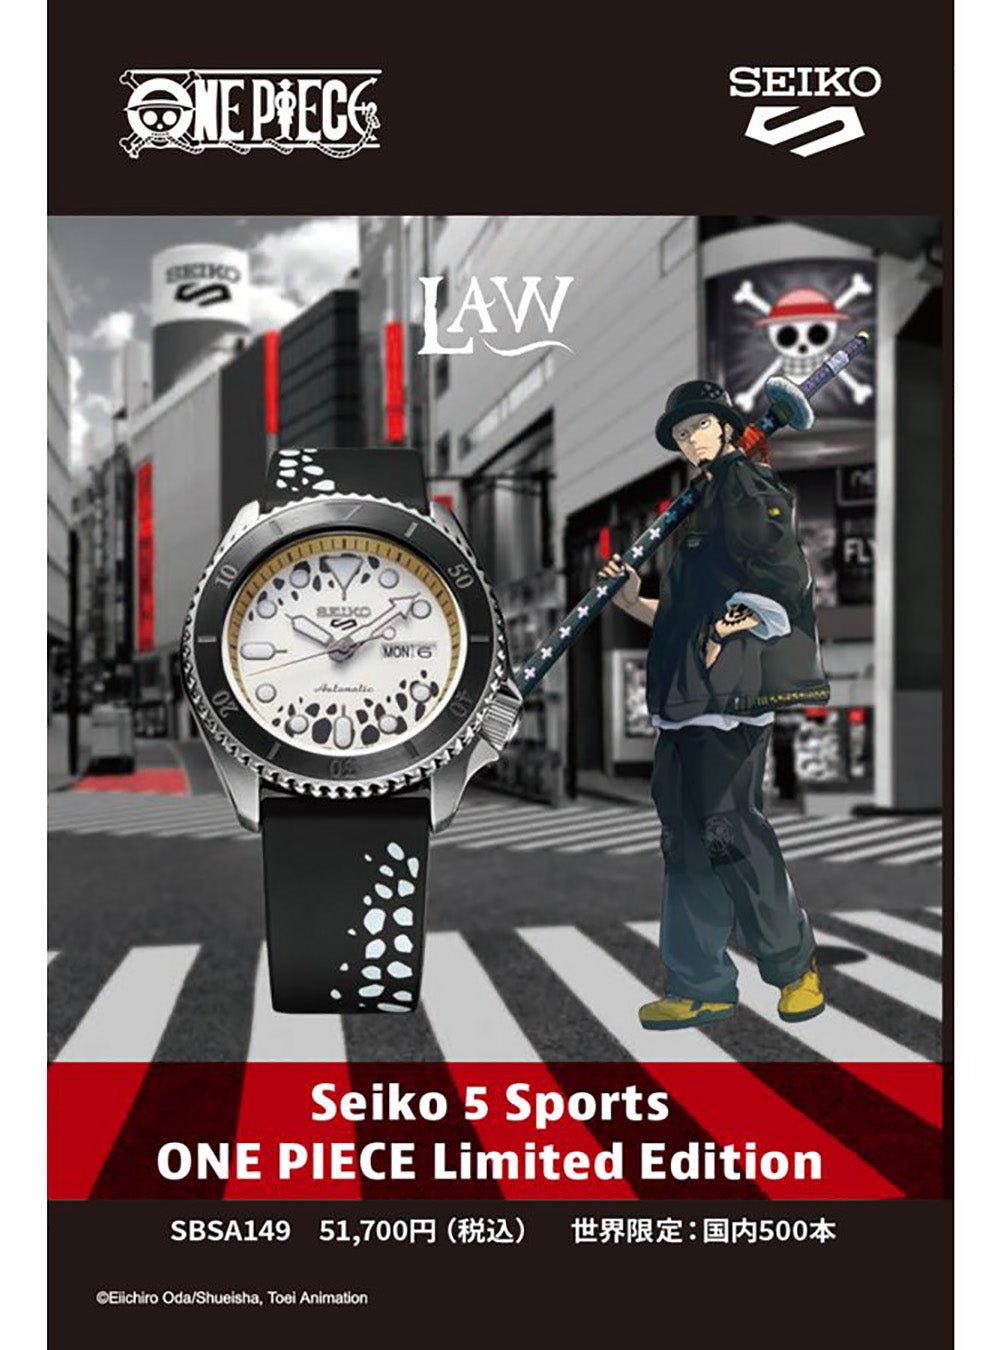 SEIKO 5 SPORTS ONE PIECE LIMITED EDITION LAW SBSA149 MADE IN JAPAN JDMWatchesjapan-select